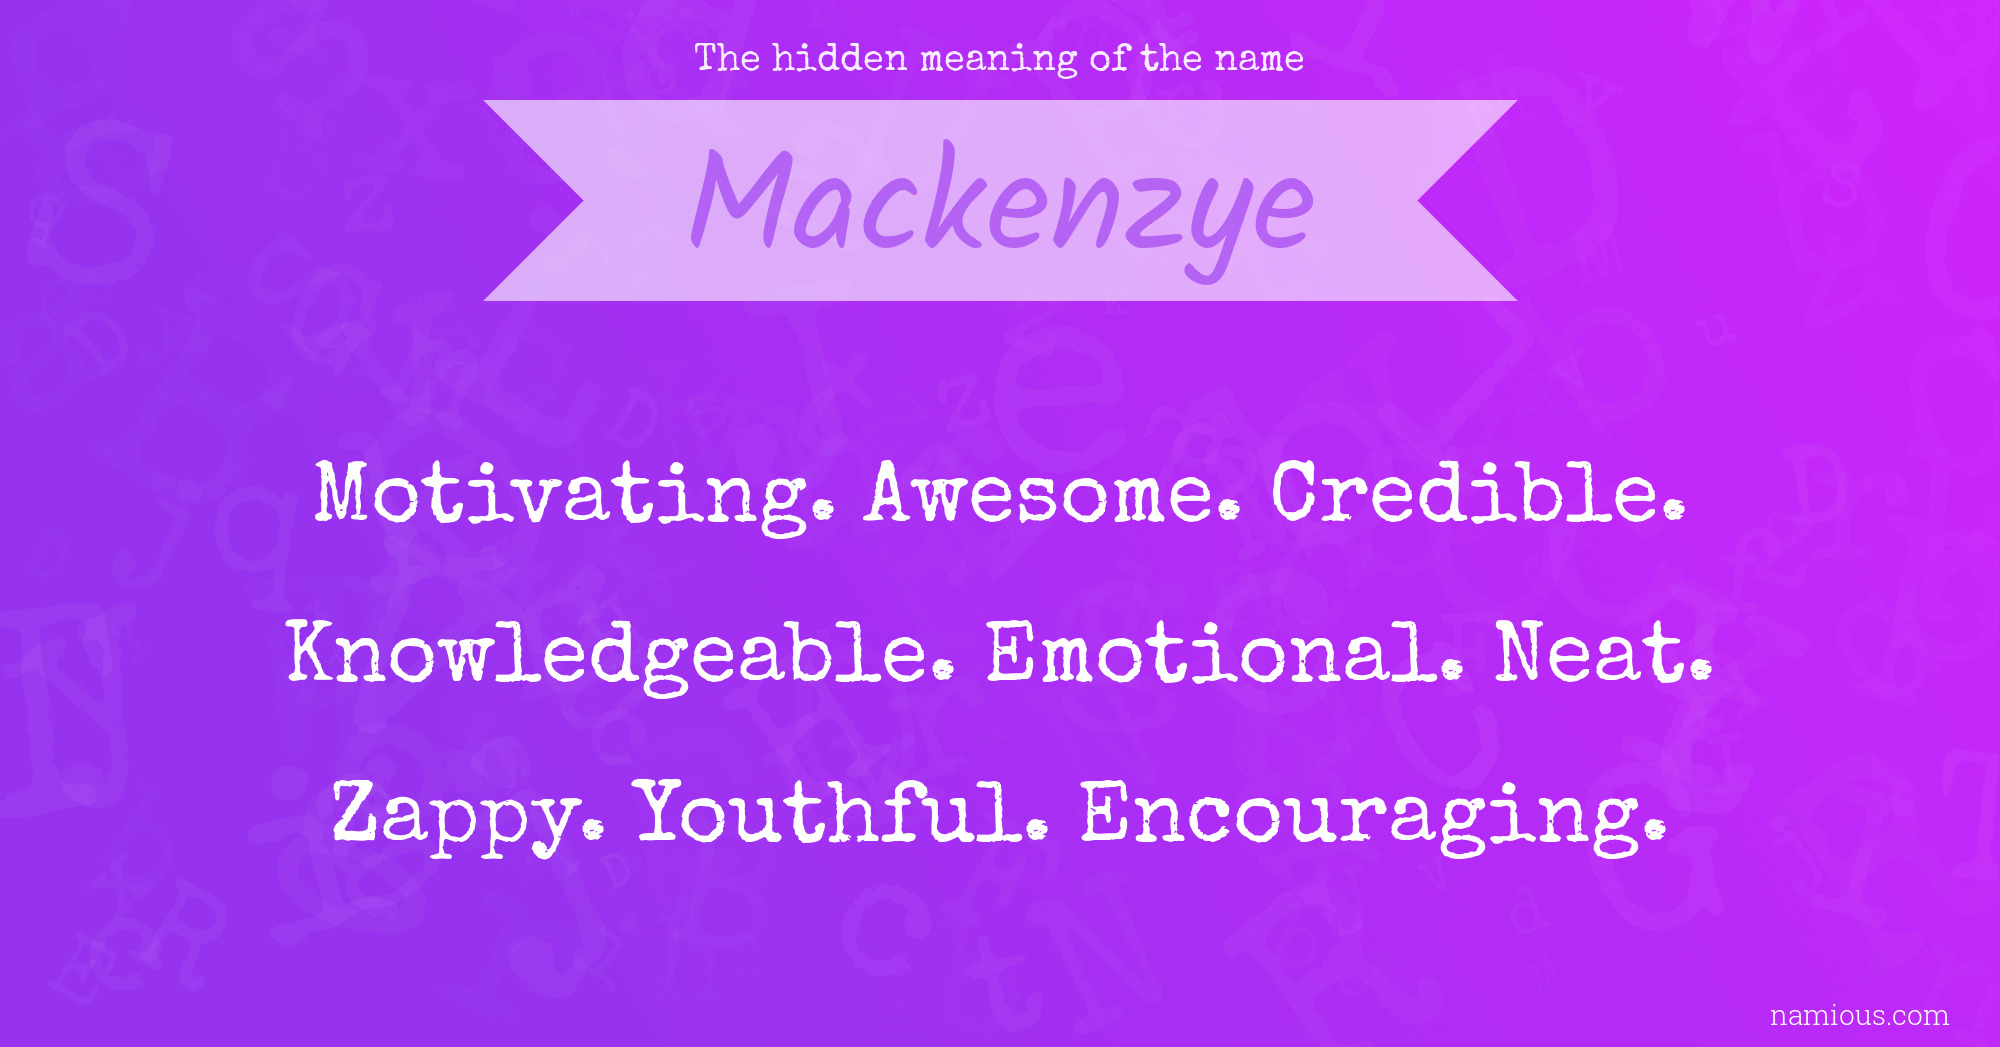 The hidden meaning of the name Mackenzye